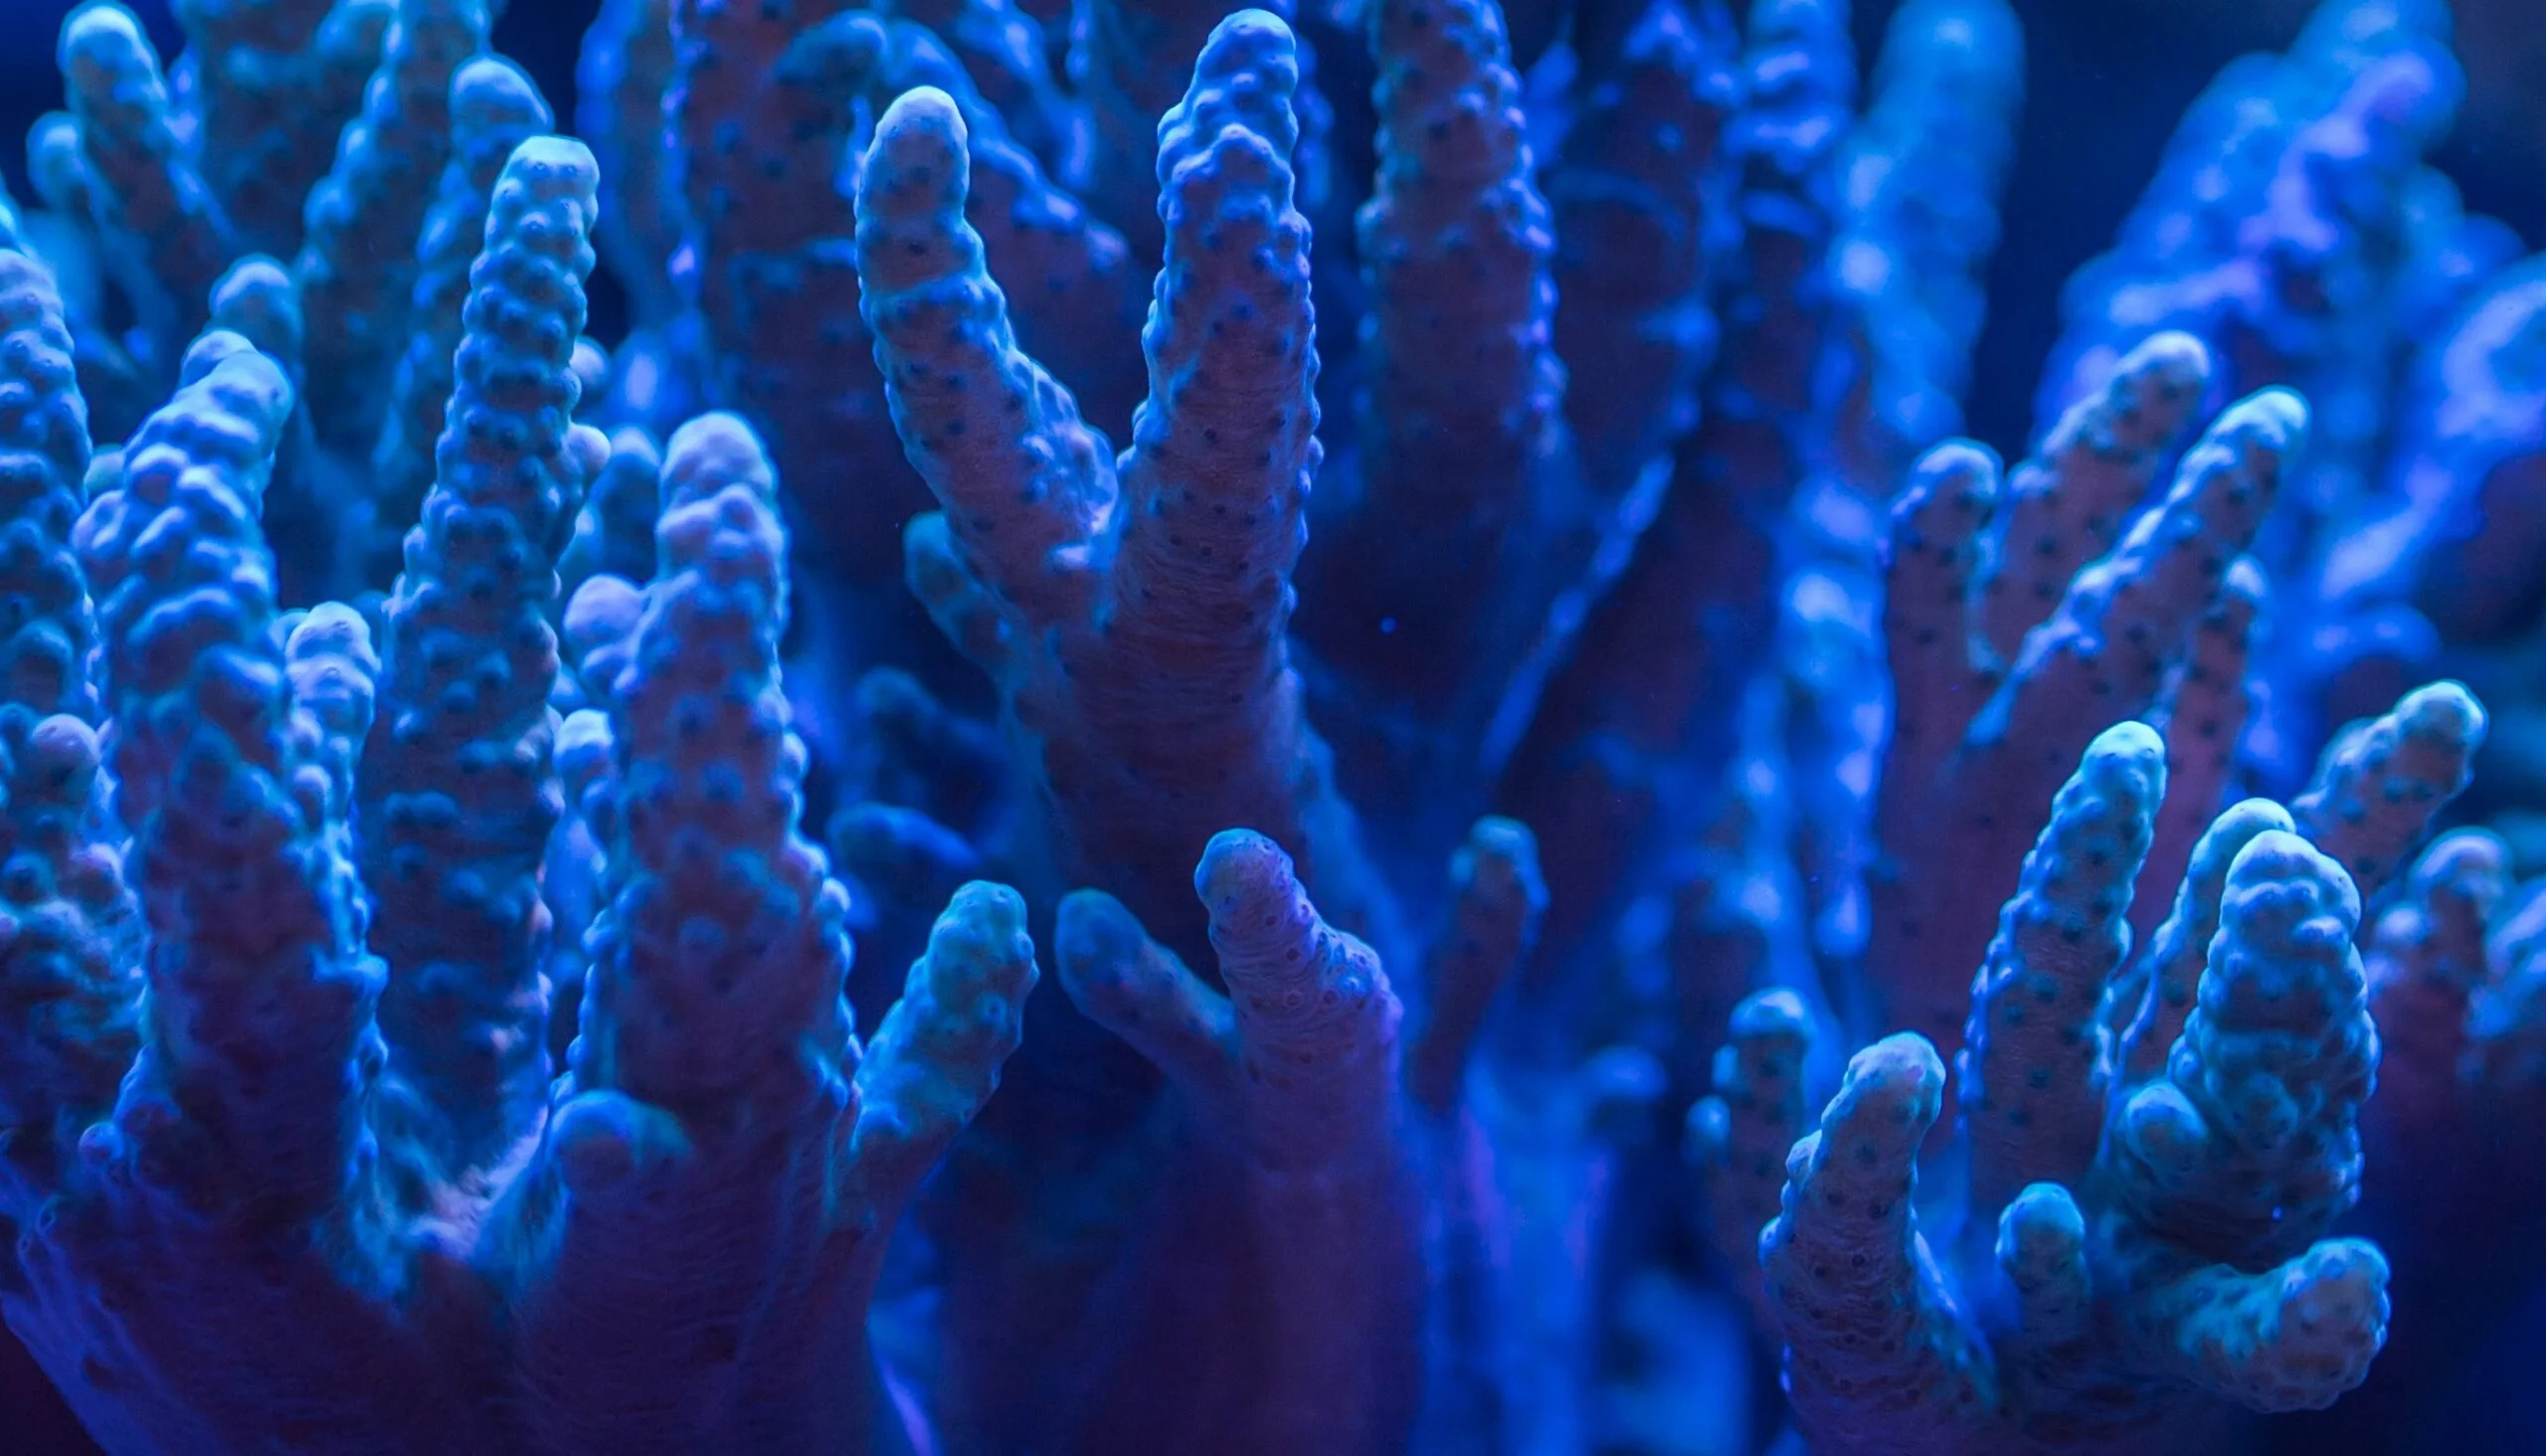 Holistic coral view, Nature's interconnectedness, Coral reef health perspective, A comprehensive approach, 2560x1470 HD Desktop